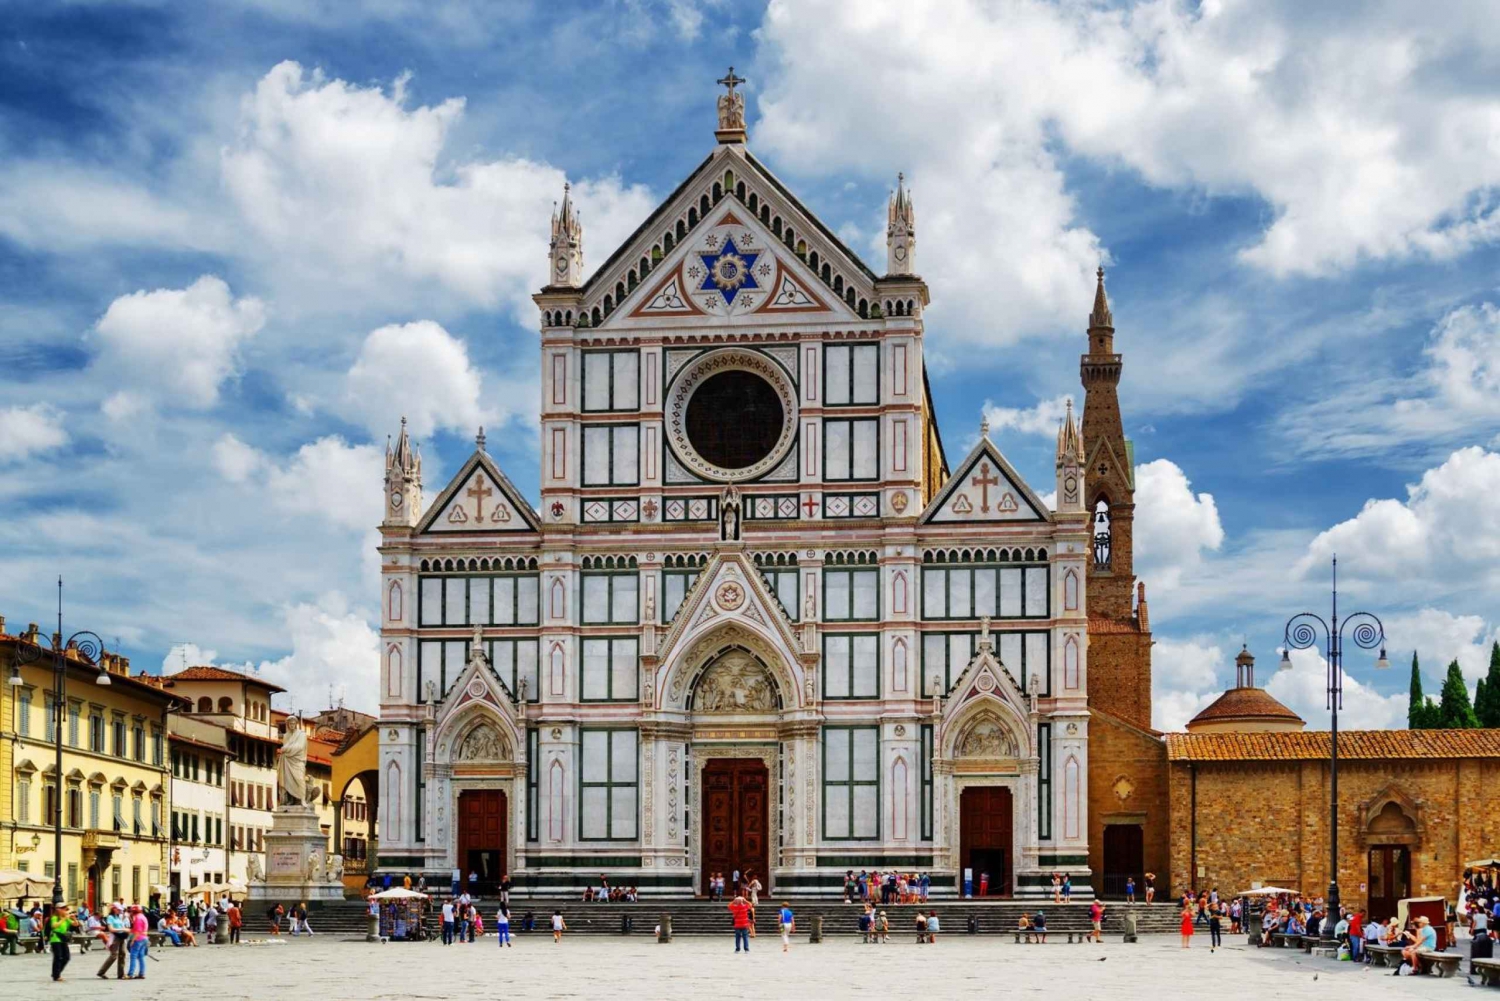 Discover Tuscany: Florence & Chianti Day Trip